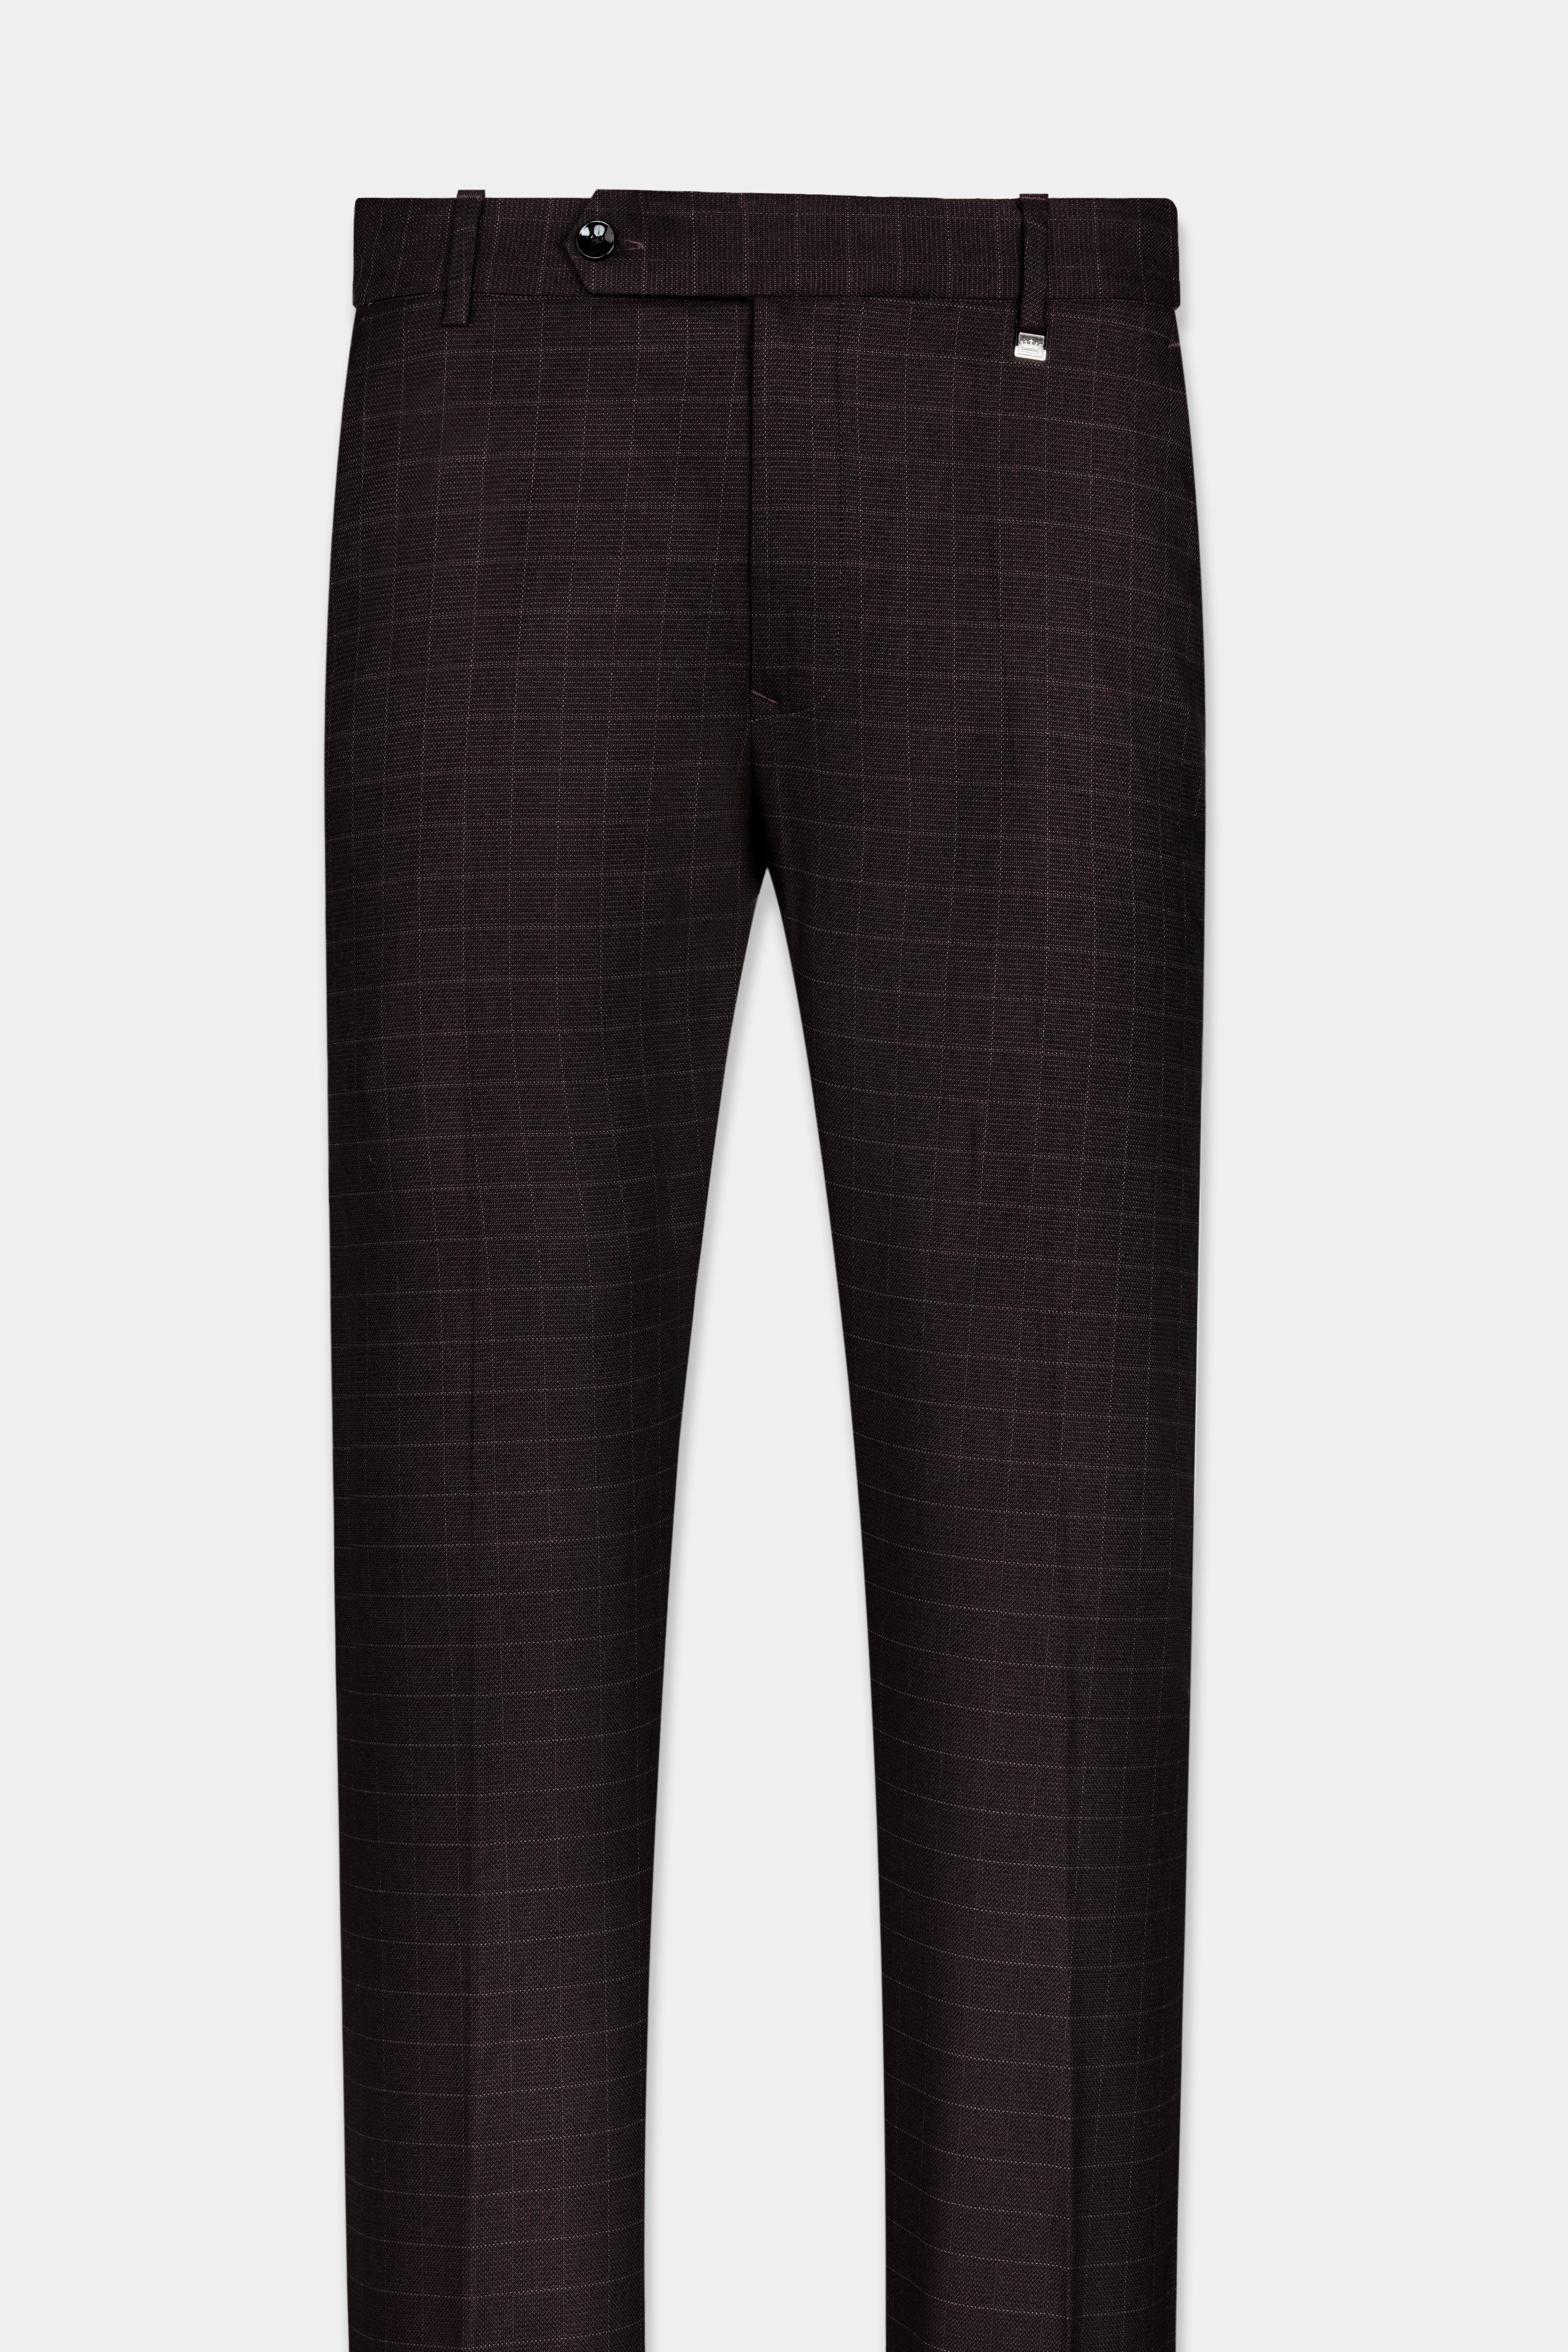 Gondola Brown Checkered Wool Rich Pant T2902-SW-28, T2902-SW-30, T2902-SW-32, T2902-SW-34, T2902-SW-36, T2902-SW-38, T2902-SW-40, T2902-SW-42, T2902-SW-44